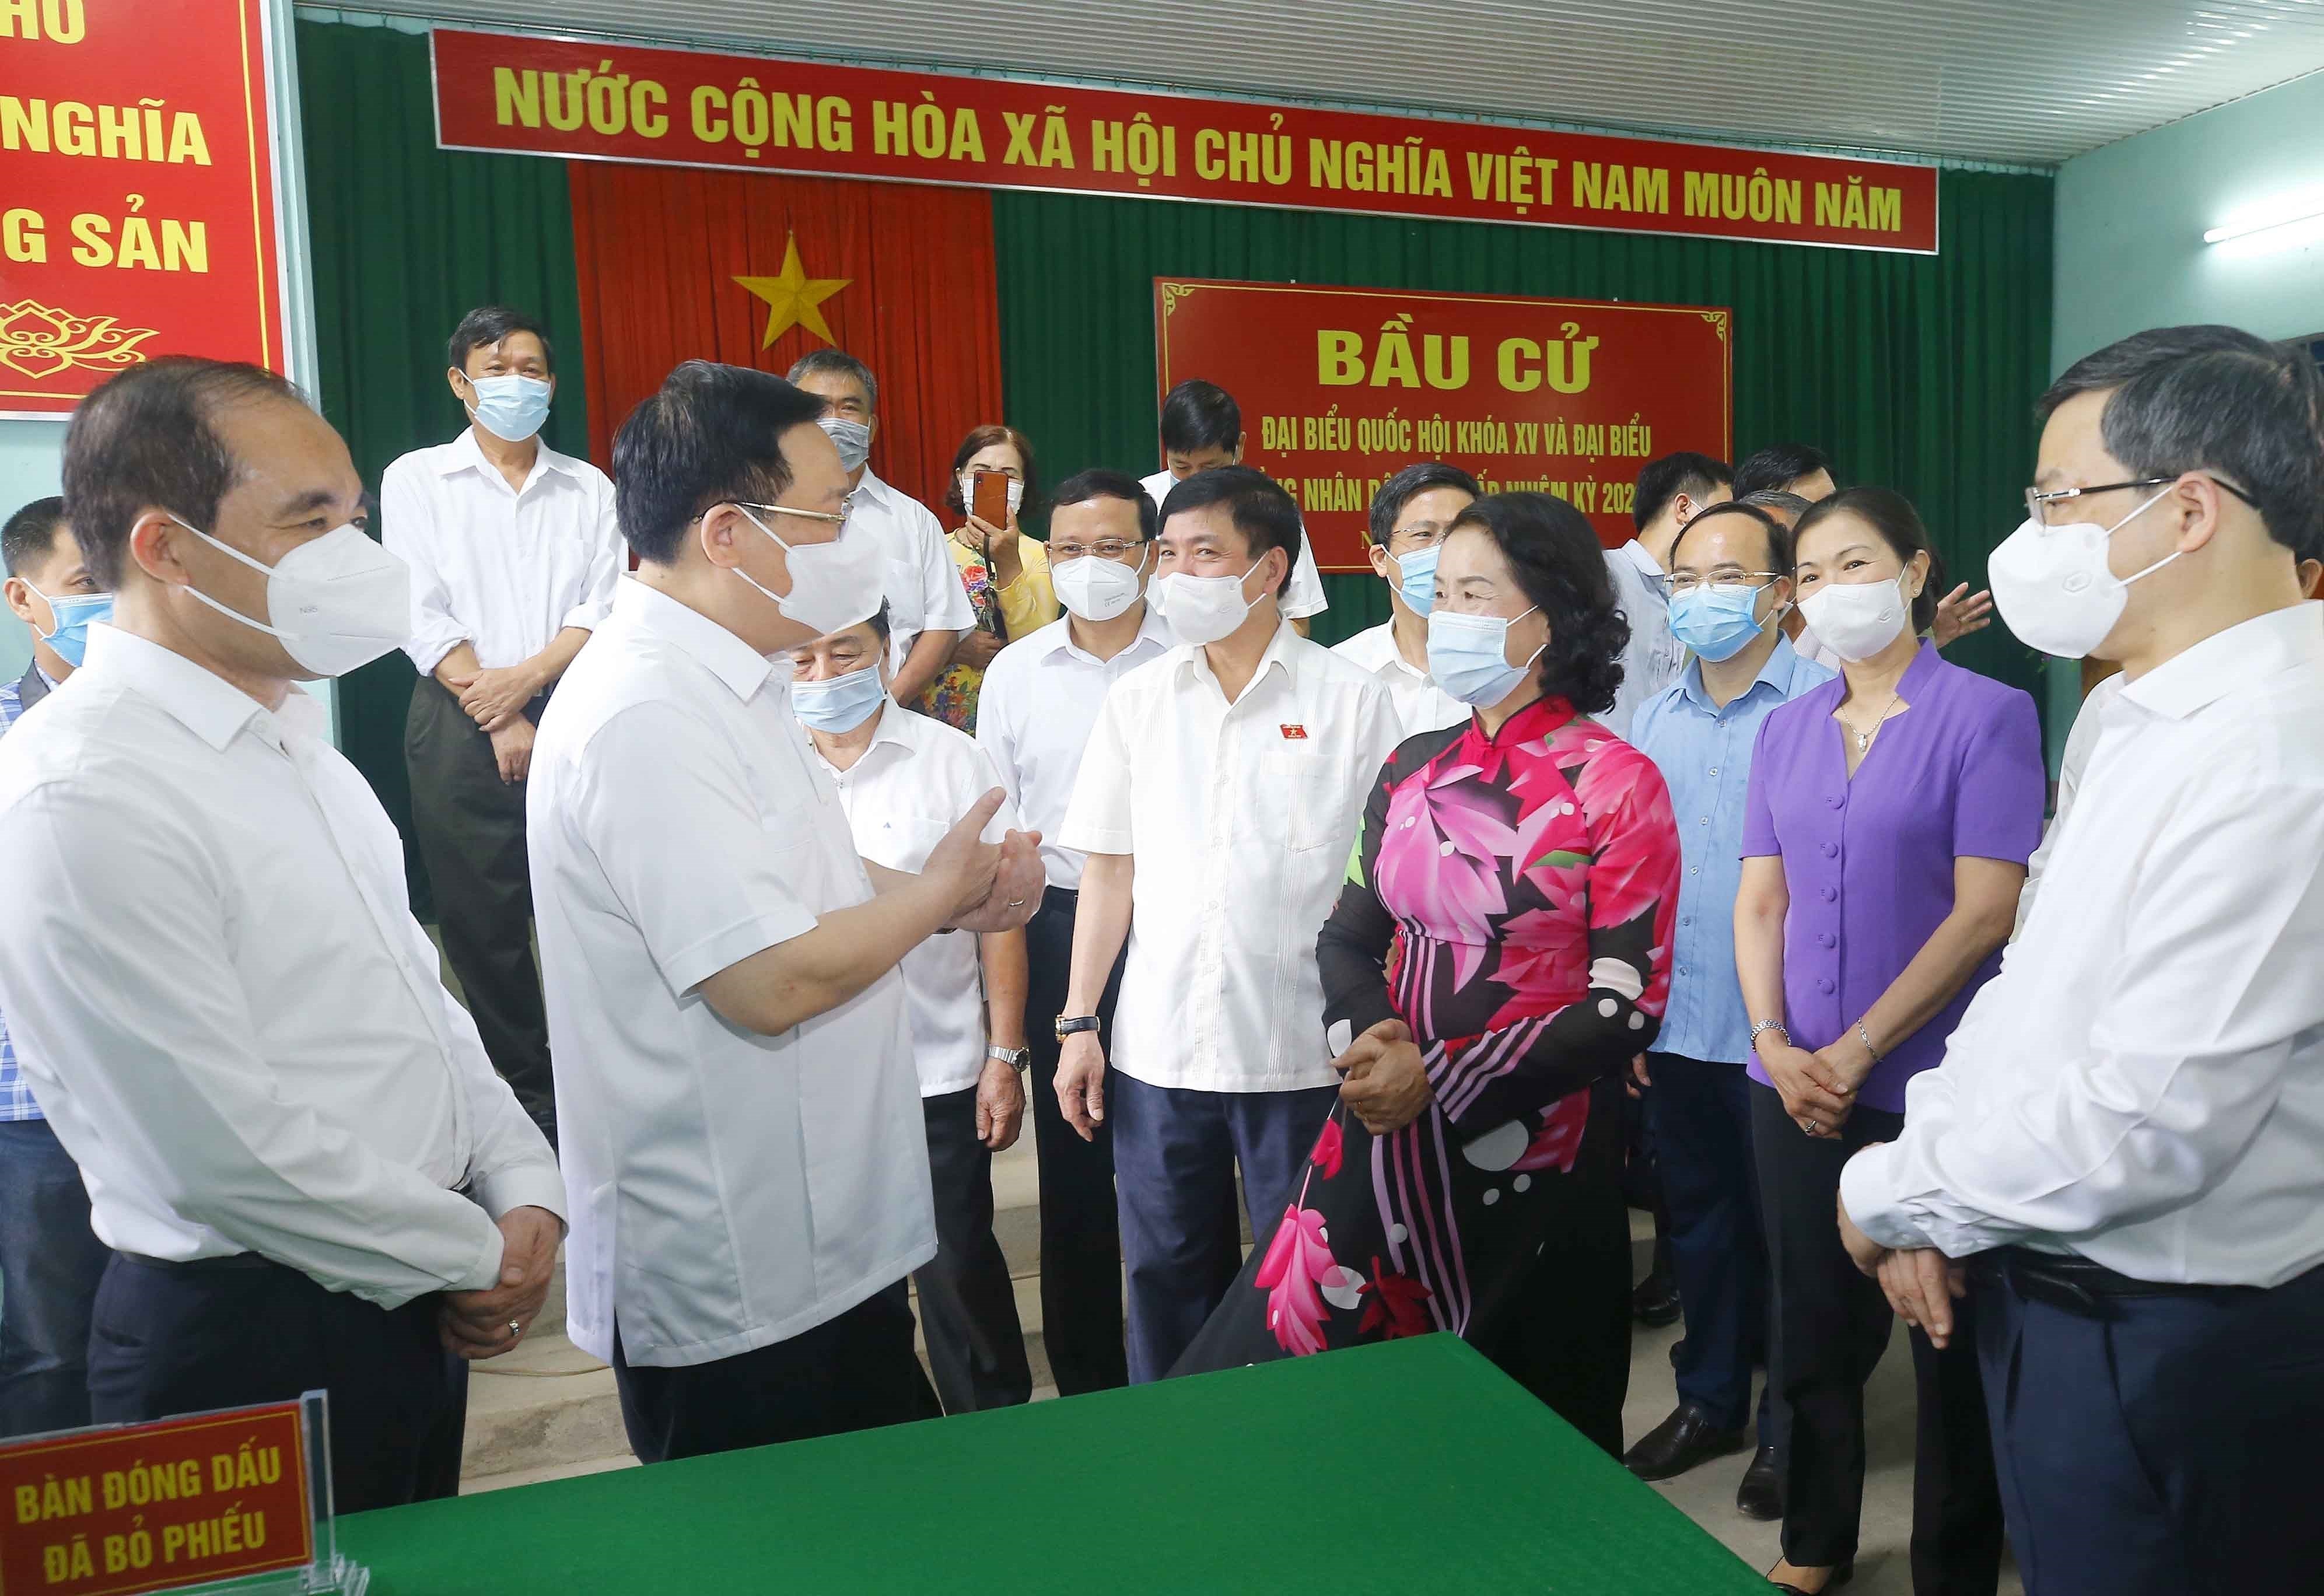 Legislative leader inspects election preparations in Tuyen Quang province hinh anh 1